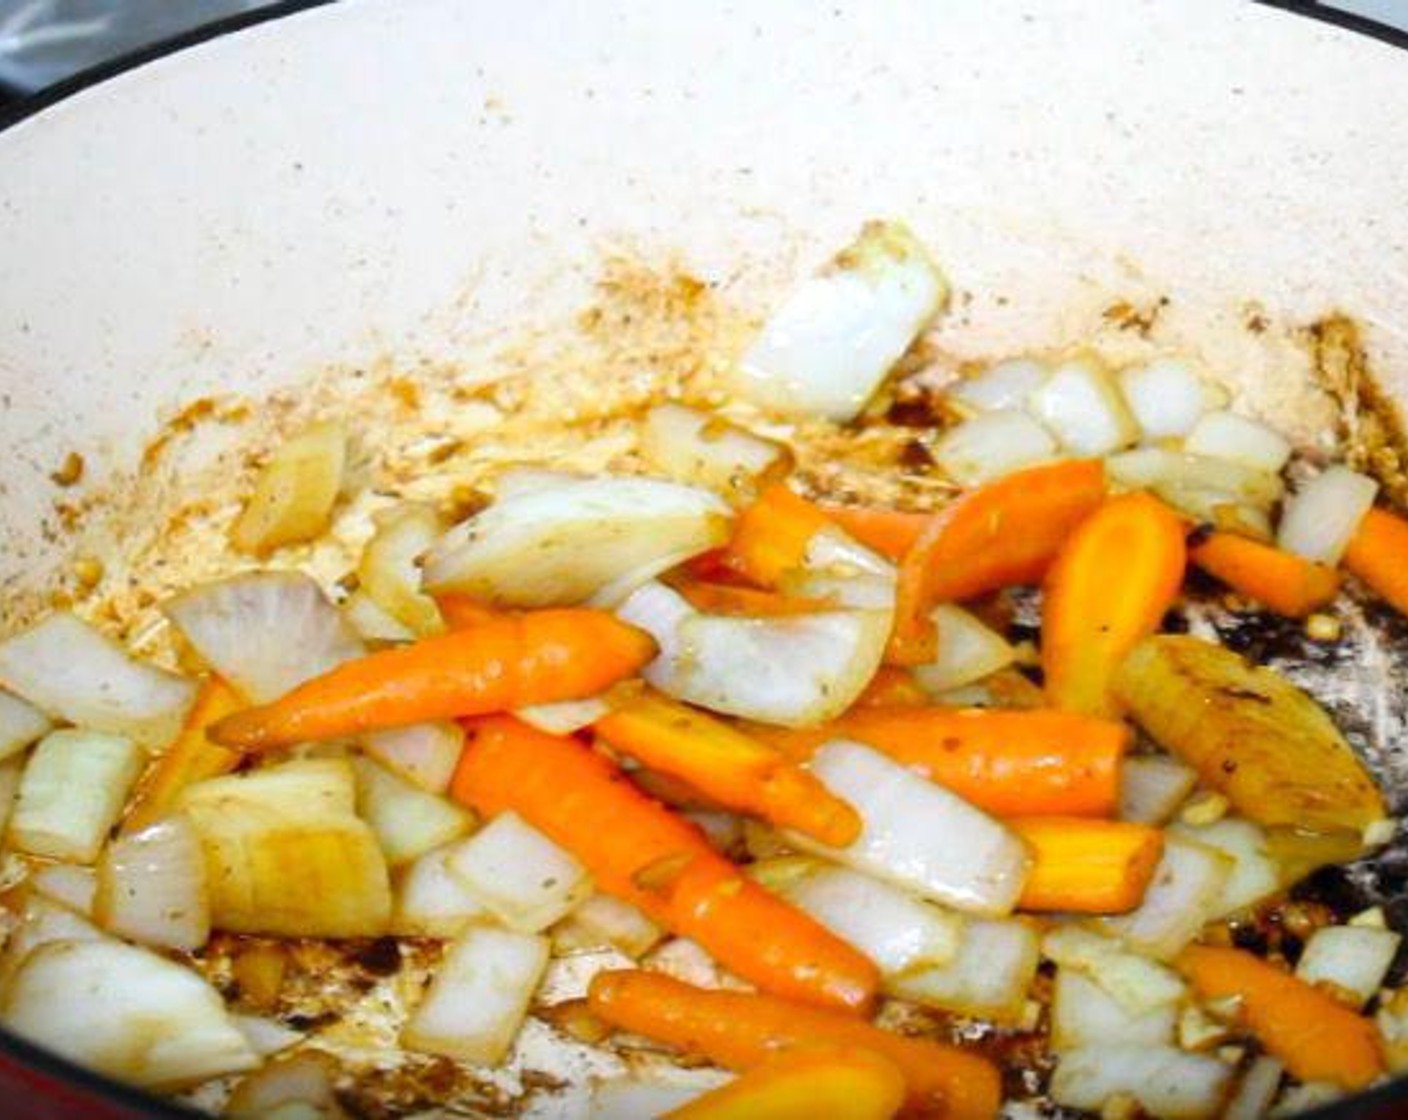 step 3 In the same pan, add Yellow Onion (1), Carrots (2), Garlic (2 cloves), and Celery (2 stalks). Adjust seasonings. Cook until the vegetables start to soften.